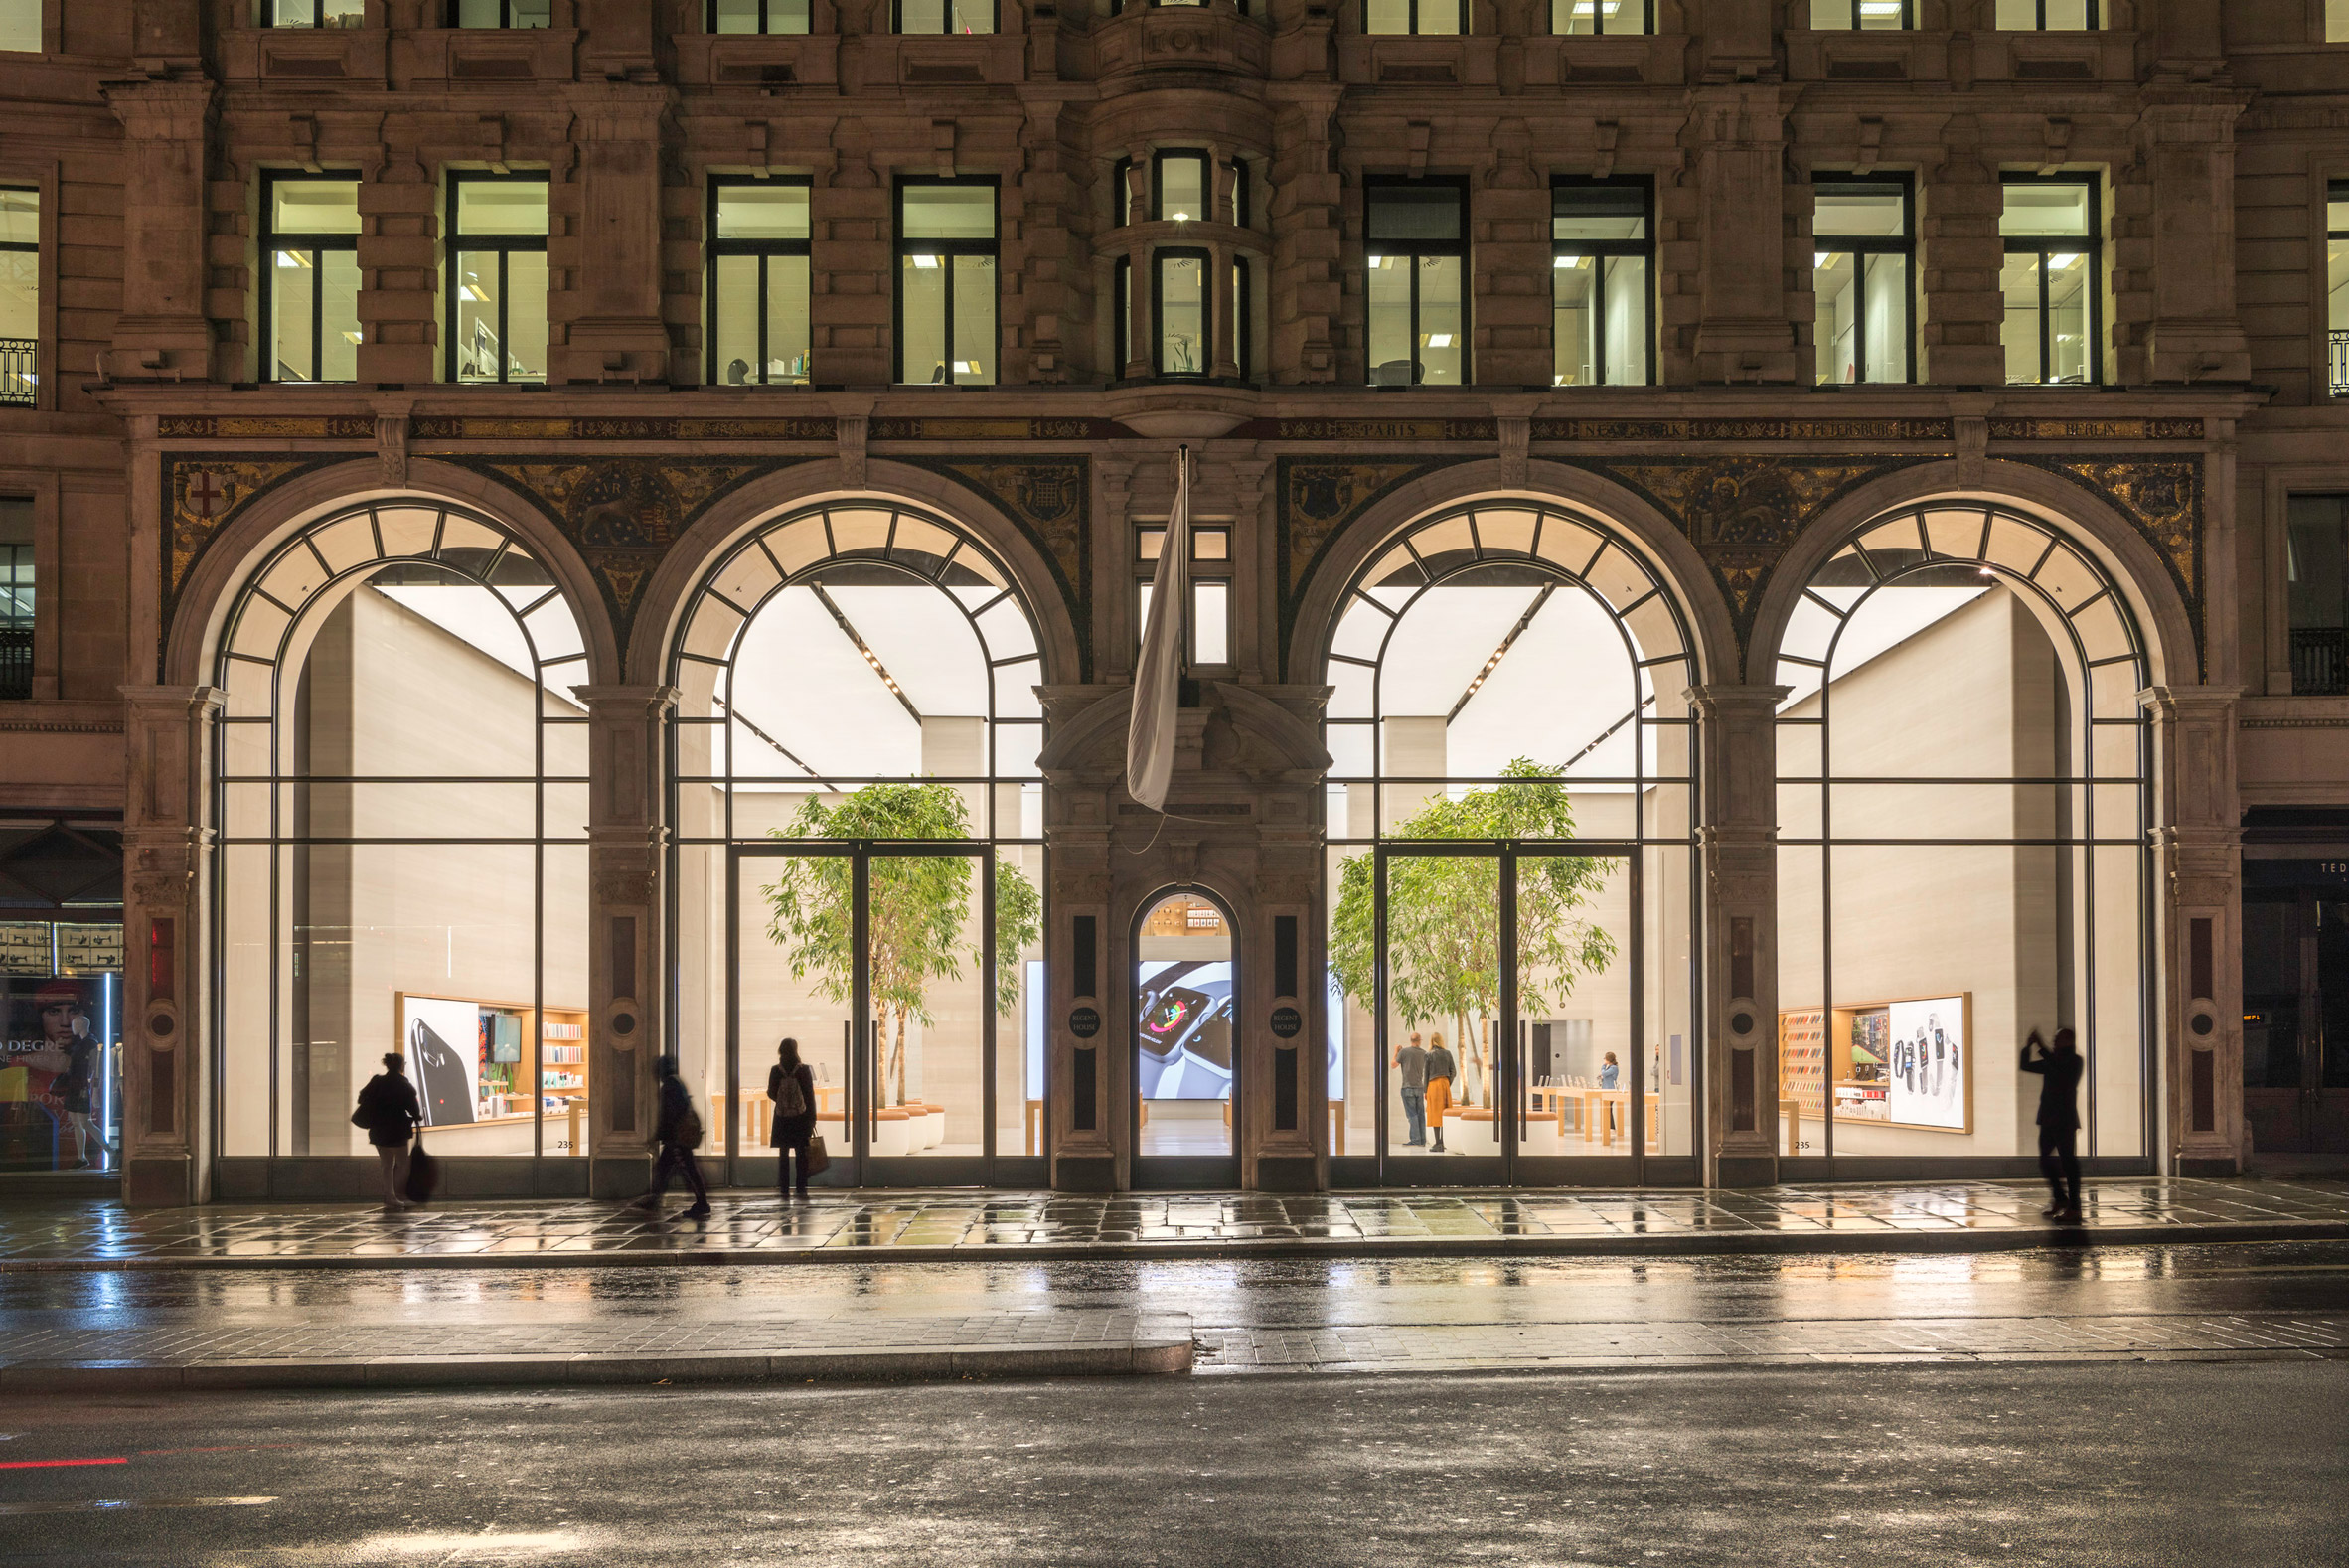 Apple's new store in London has reopened following a major renovation by Foster + Partners that incorporates the tech giant's new approach to retail. The Regent Street store – Apple's first outpost in Europe when it opened in 2004 – was closed for a lengthy period while it was revamped according to the company's new interior design format.